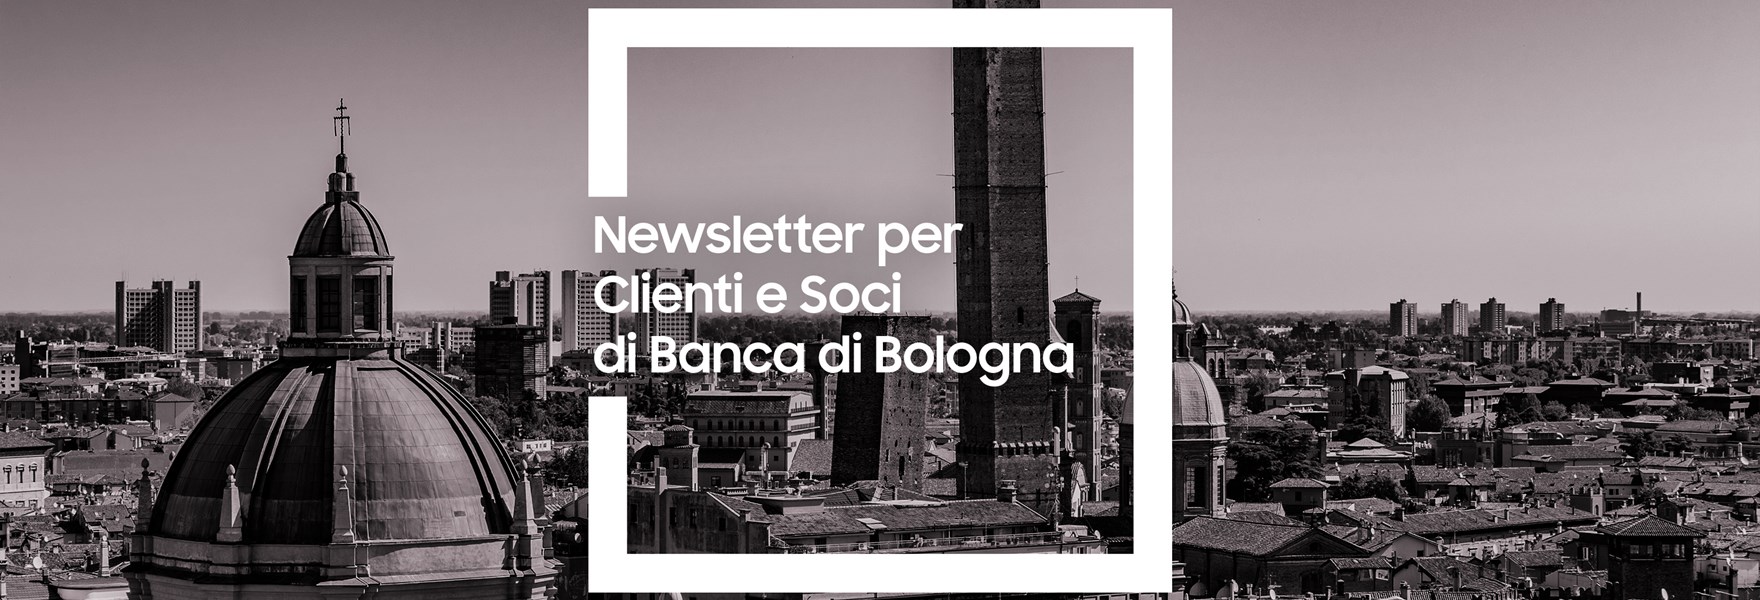 Newsletter Sito 